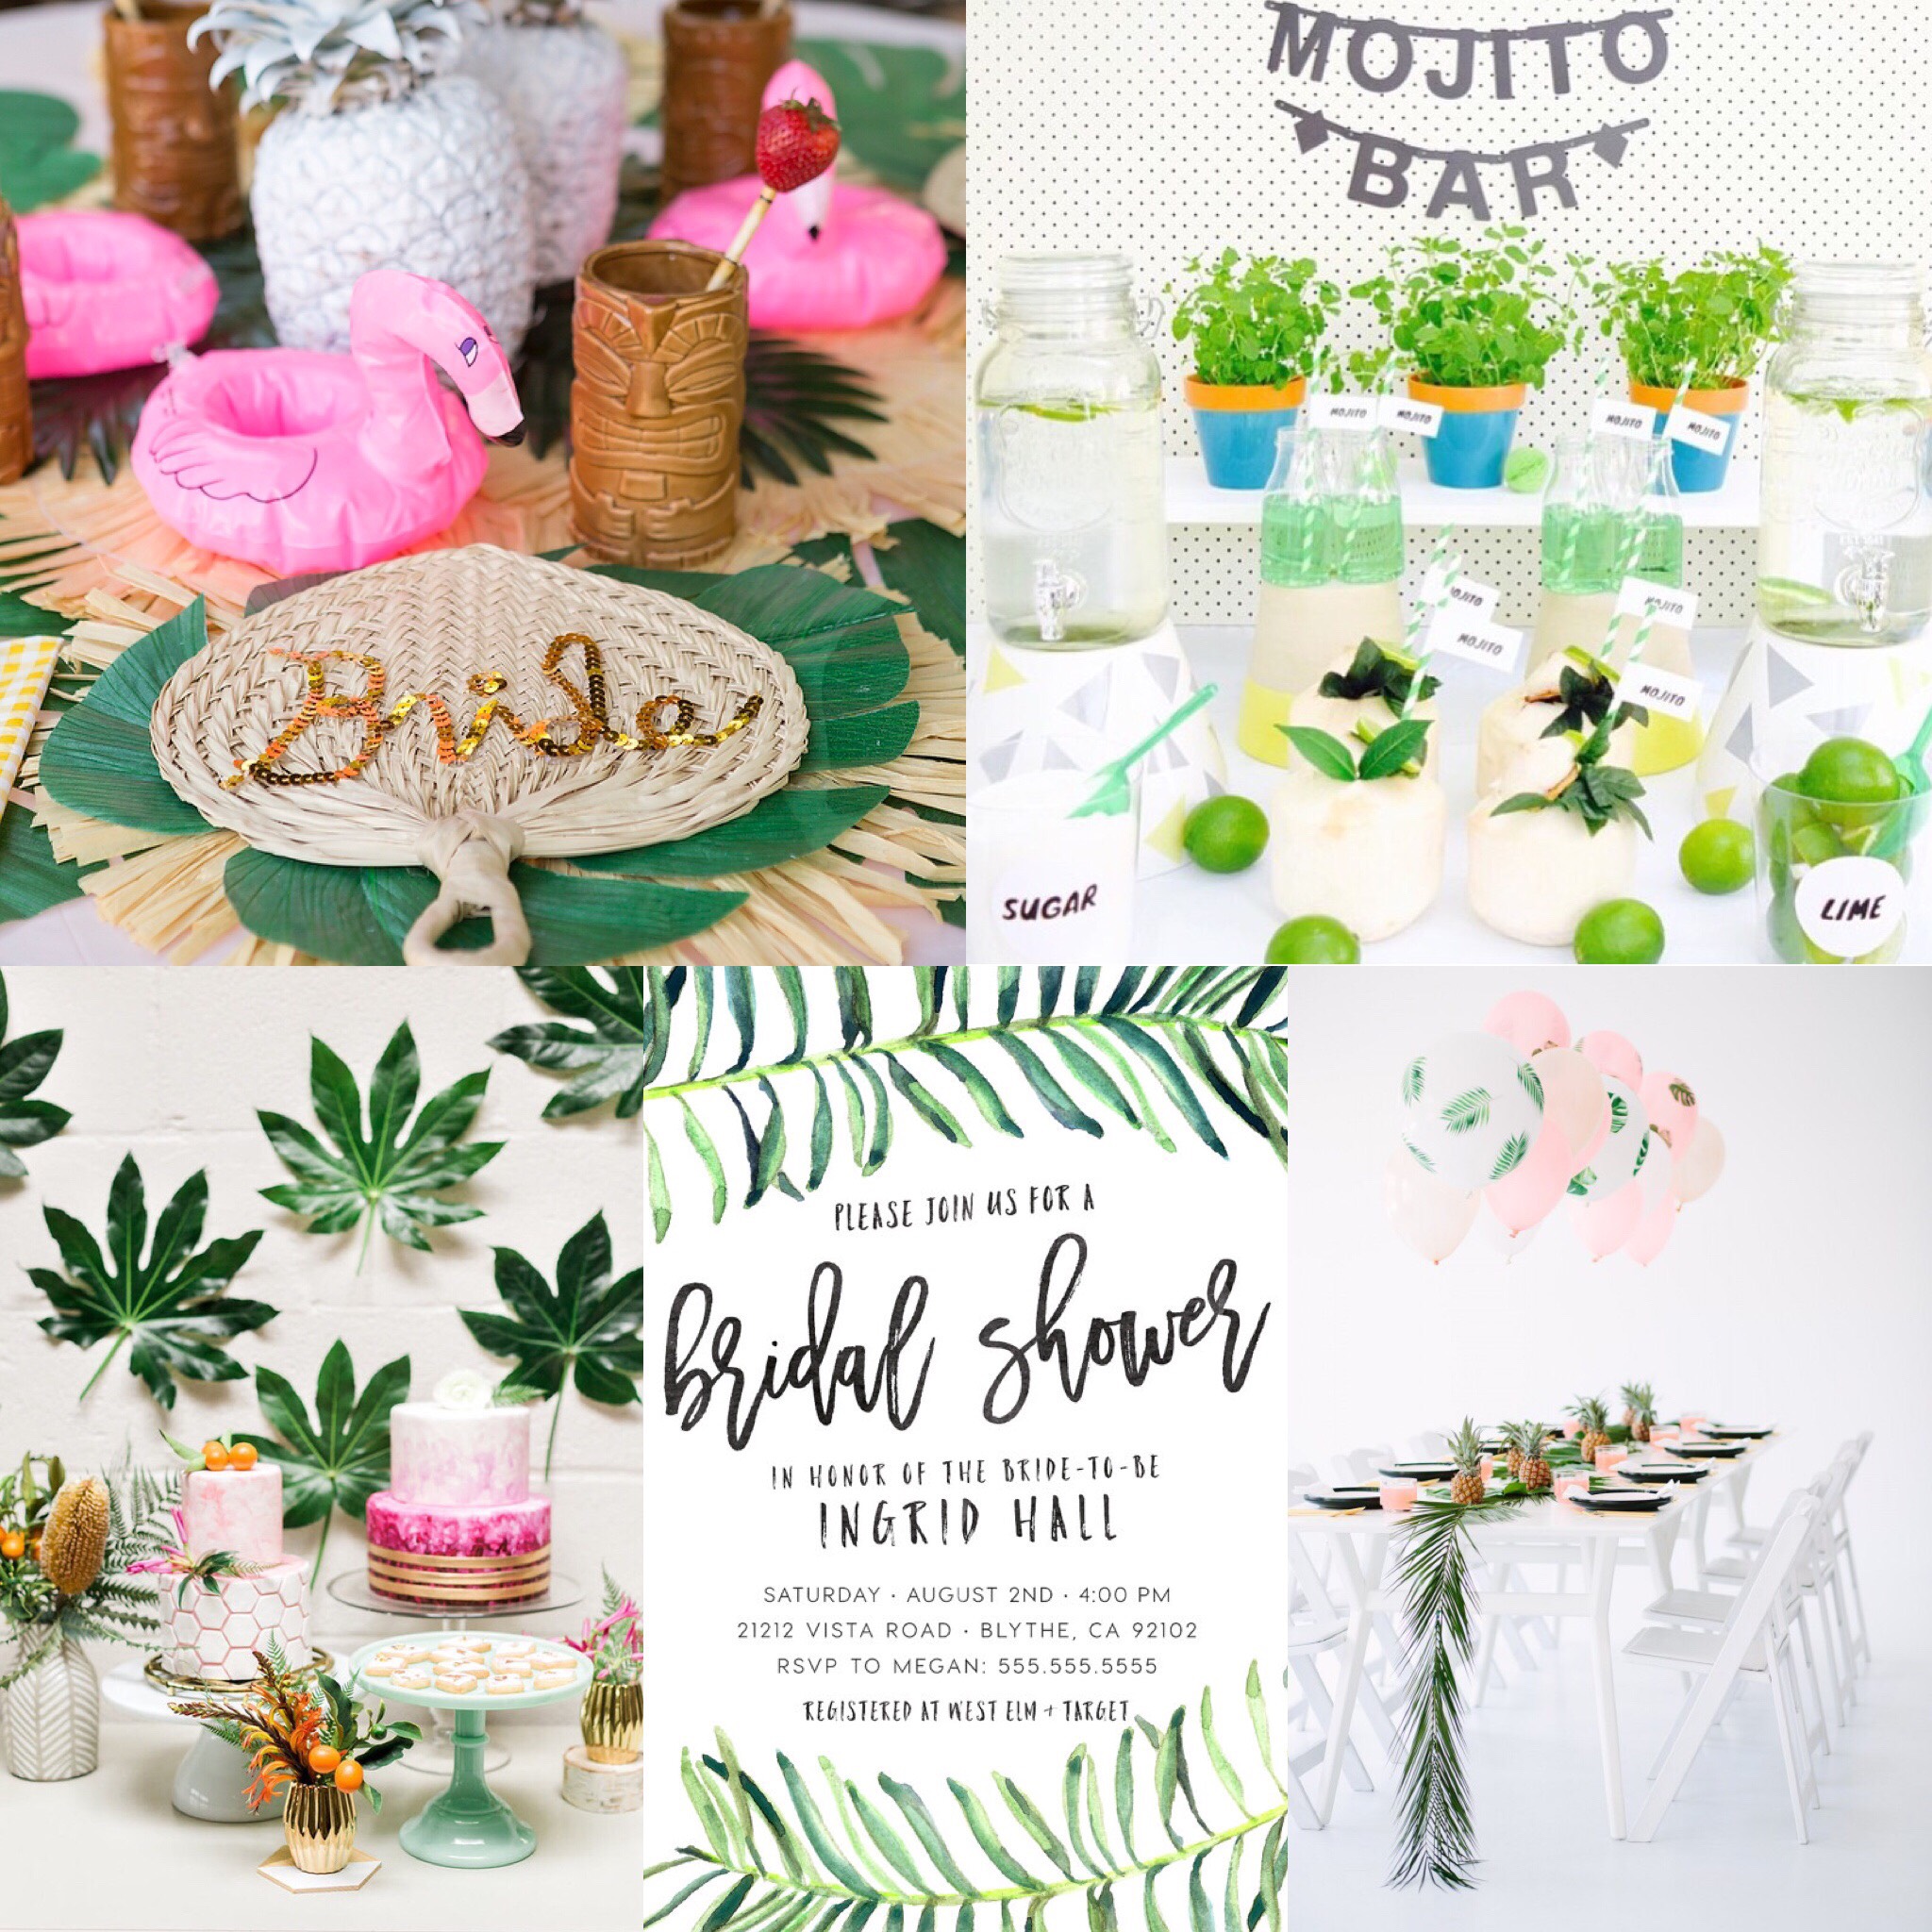 Gorgeous palm springs themed bridal shower inspiration